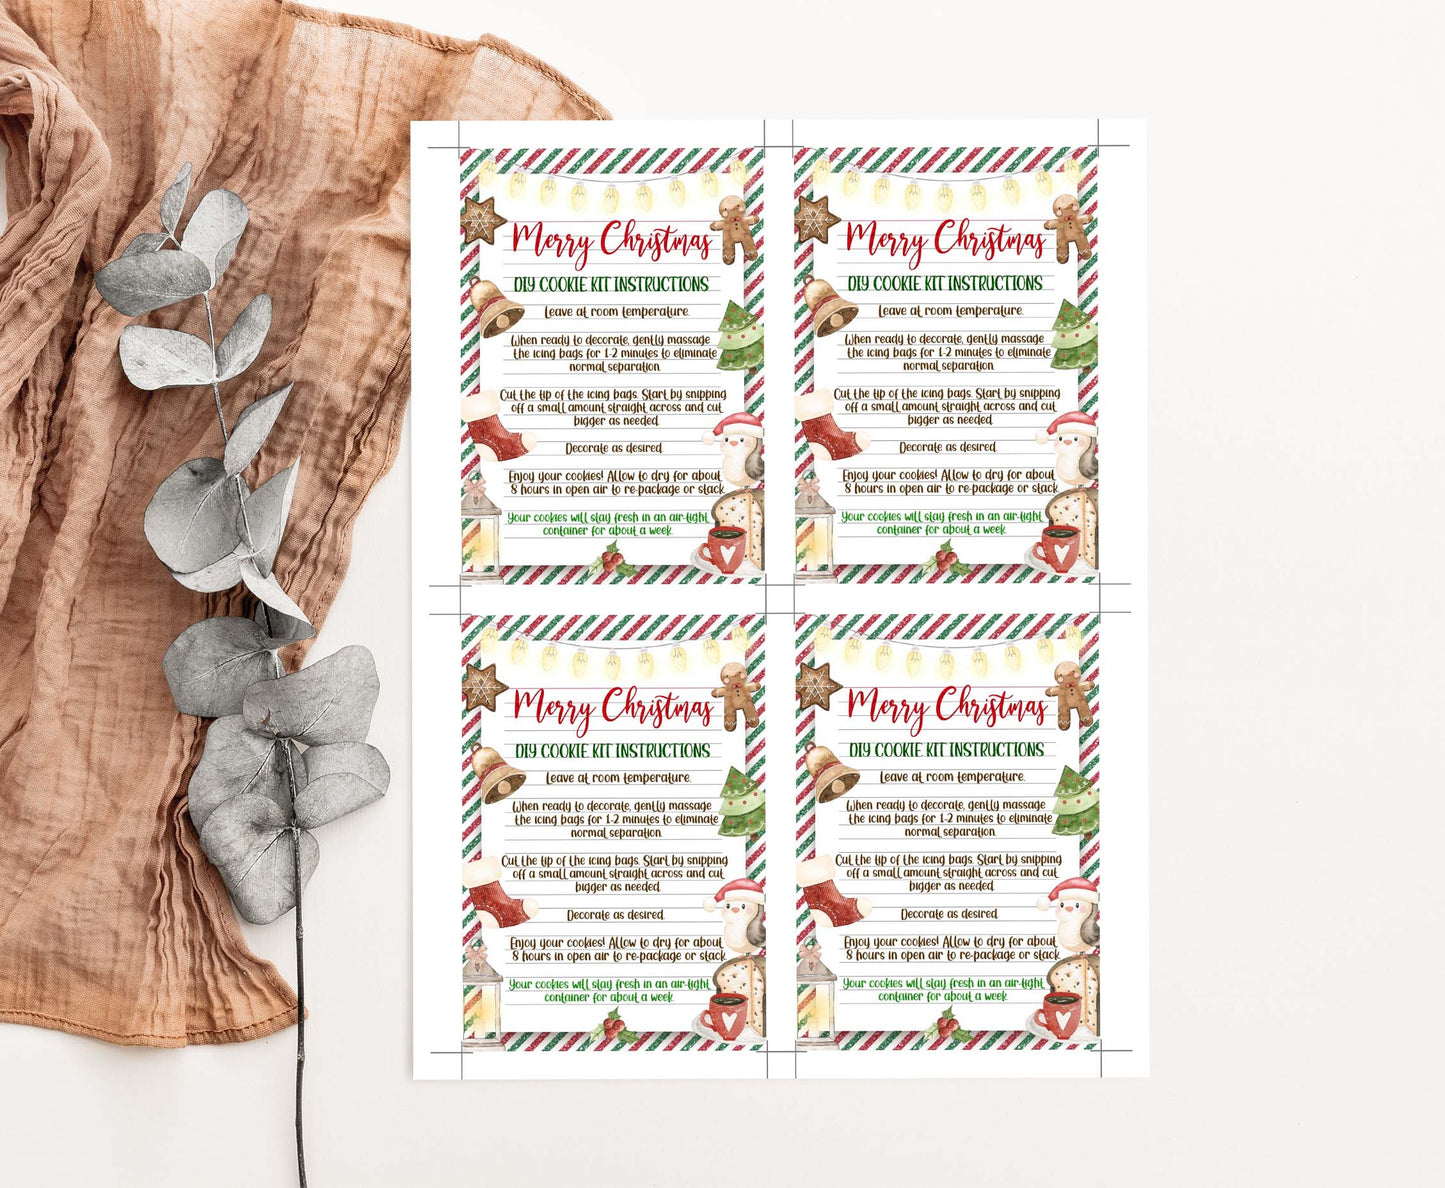 Diy Cookie Kit Instructions Card | Christmas Printable Cards - 112